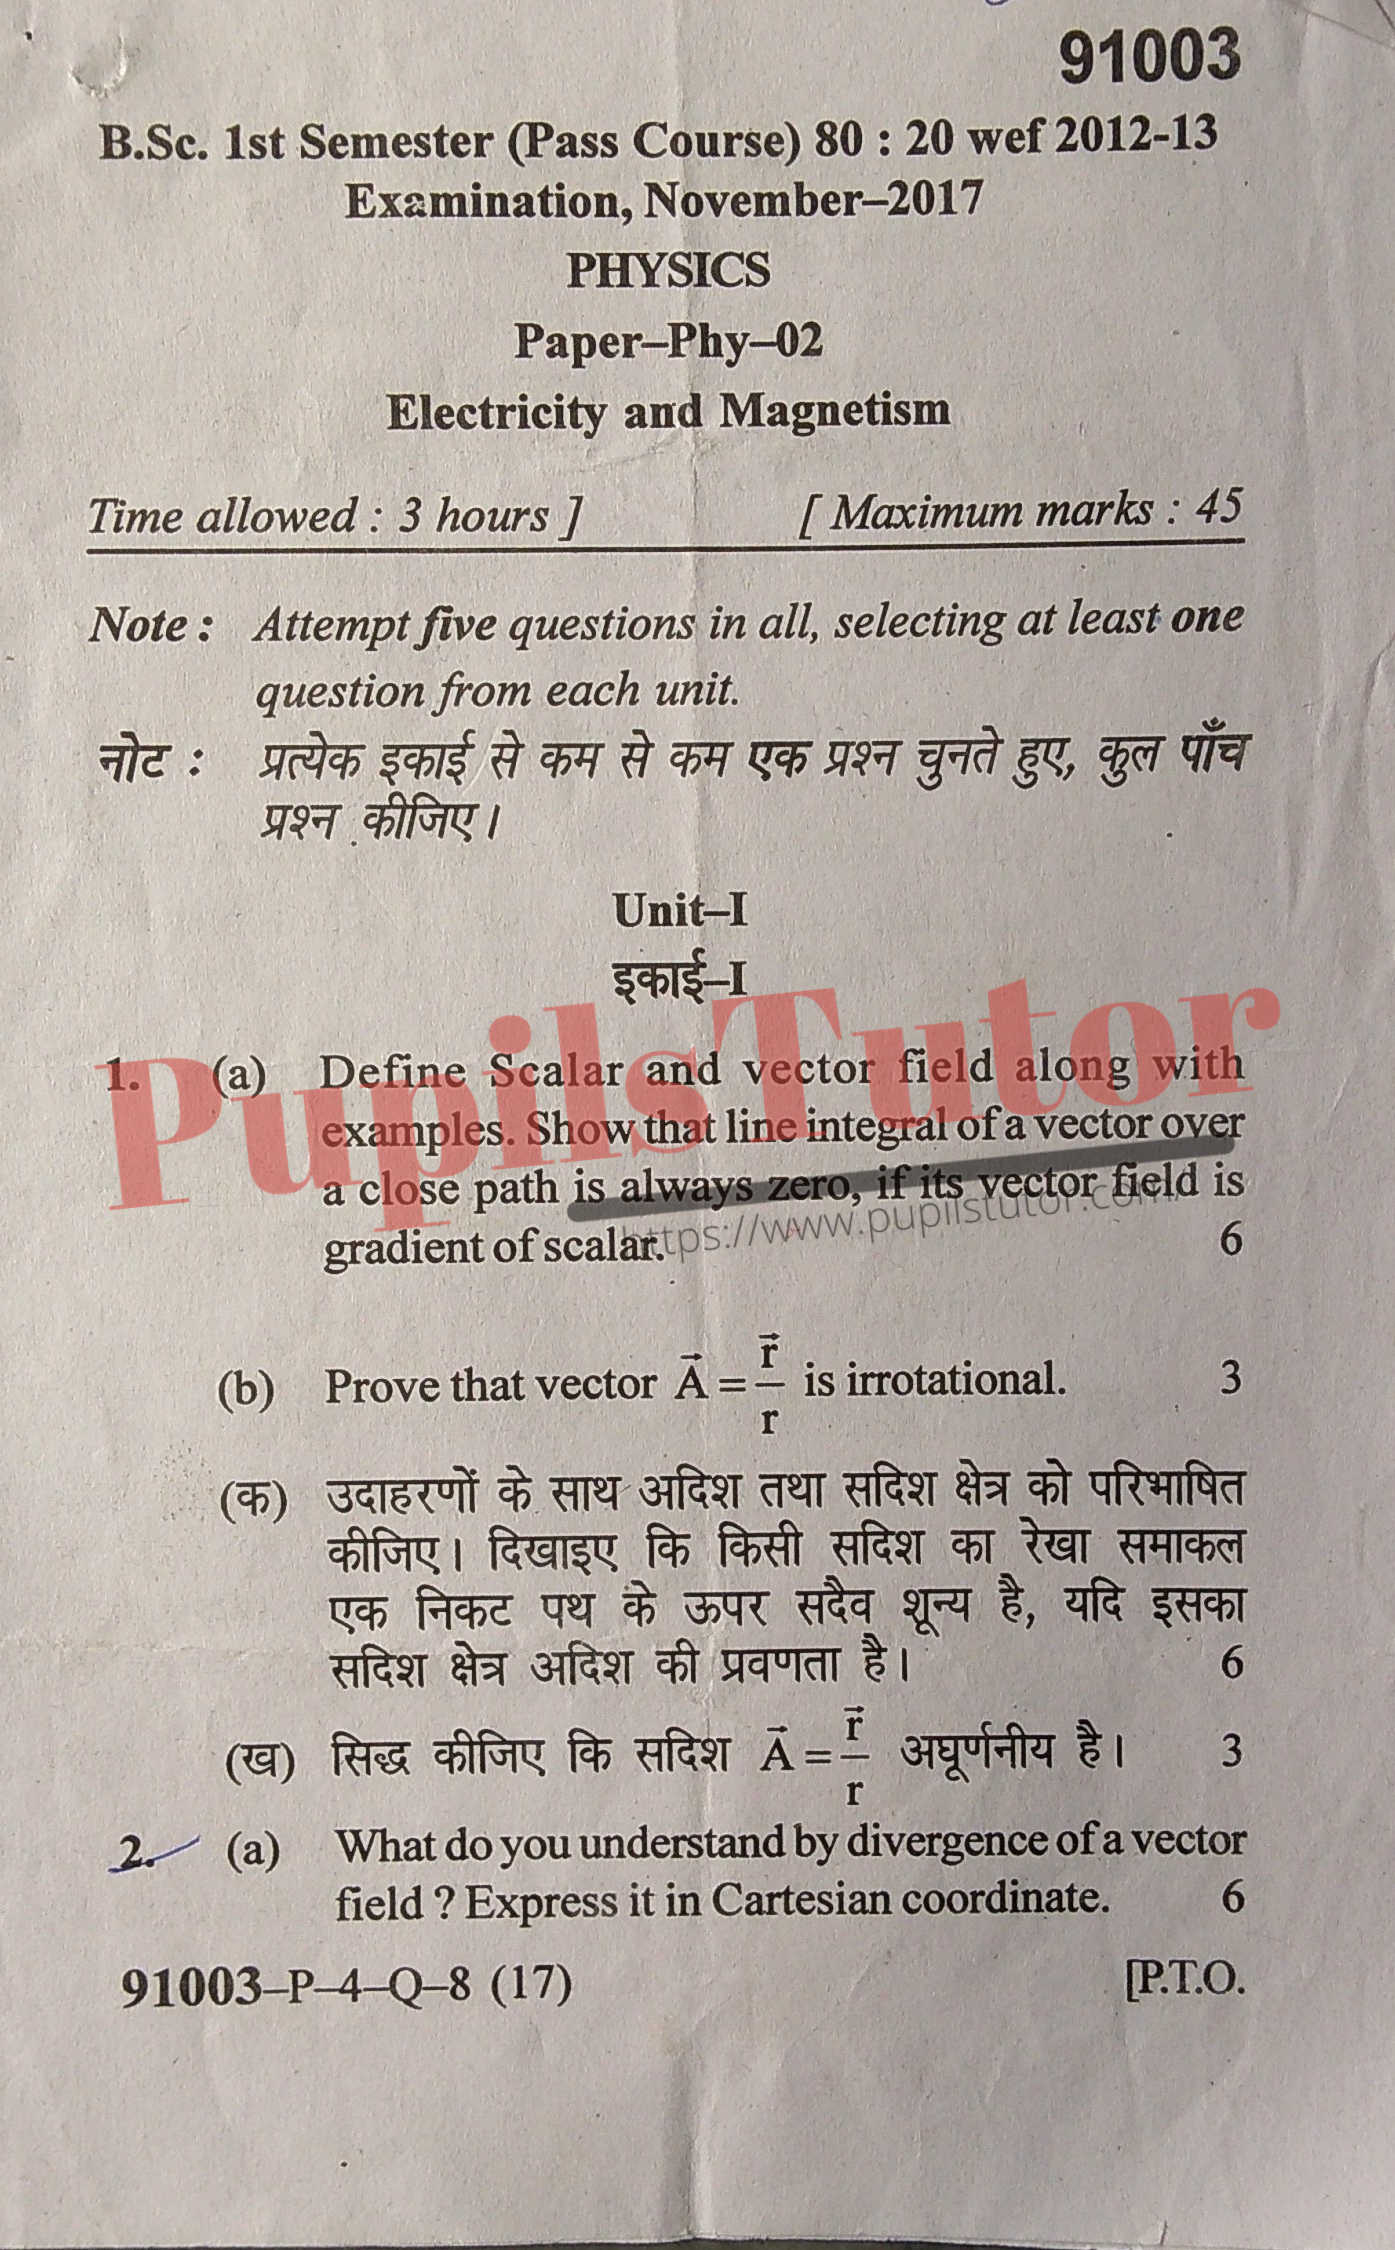 MDU (Maharshi Dayanand University, Rohtak Haryana) BSc Physics Pass Course First Semester Previous Year Electricity And Magnetism Question Paper For November, 2017 Exam (Question Paper Page 1) - pupilstutor.com